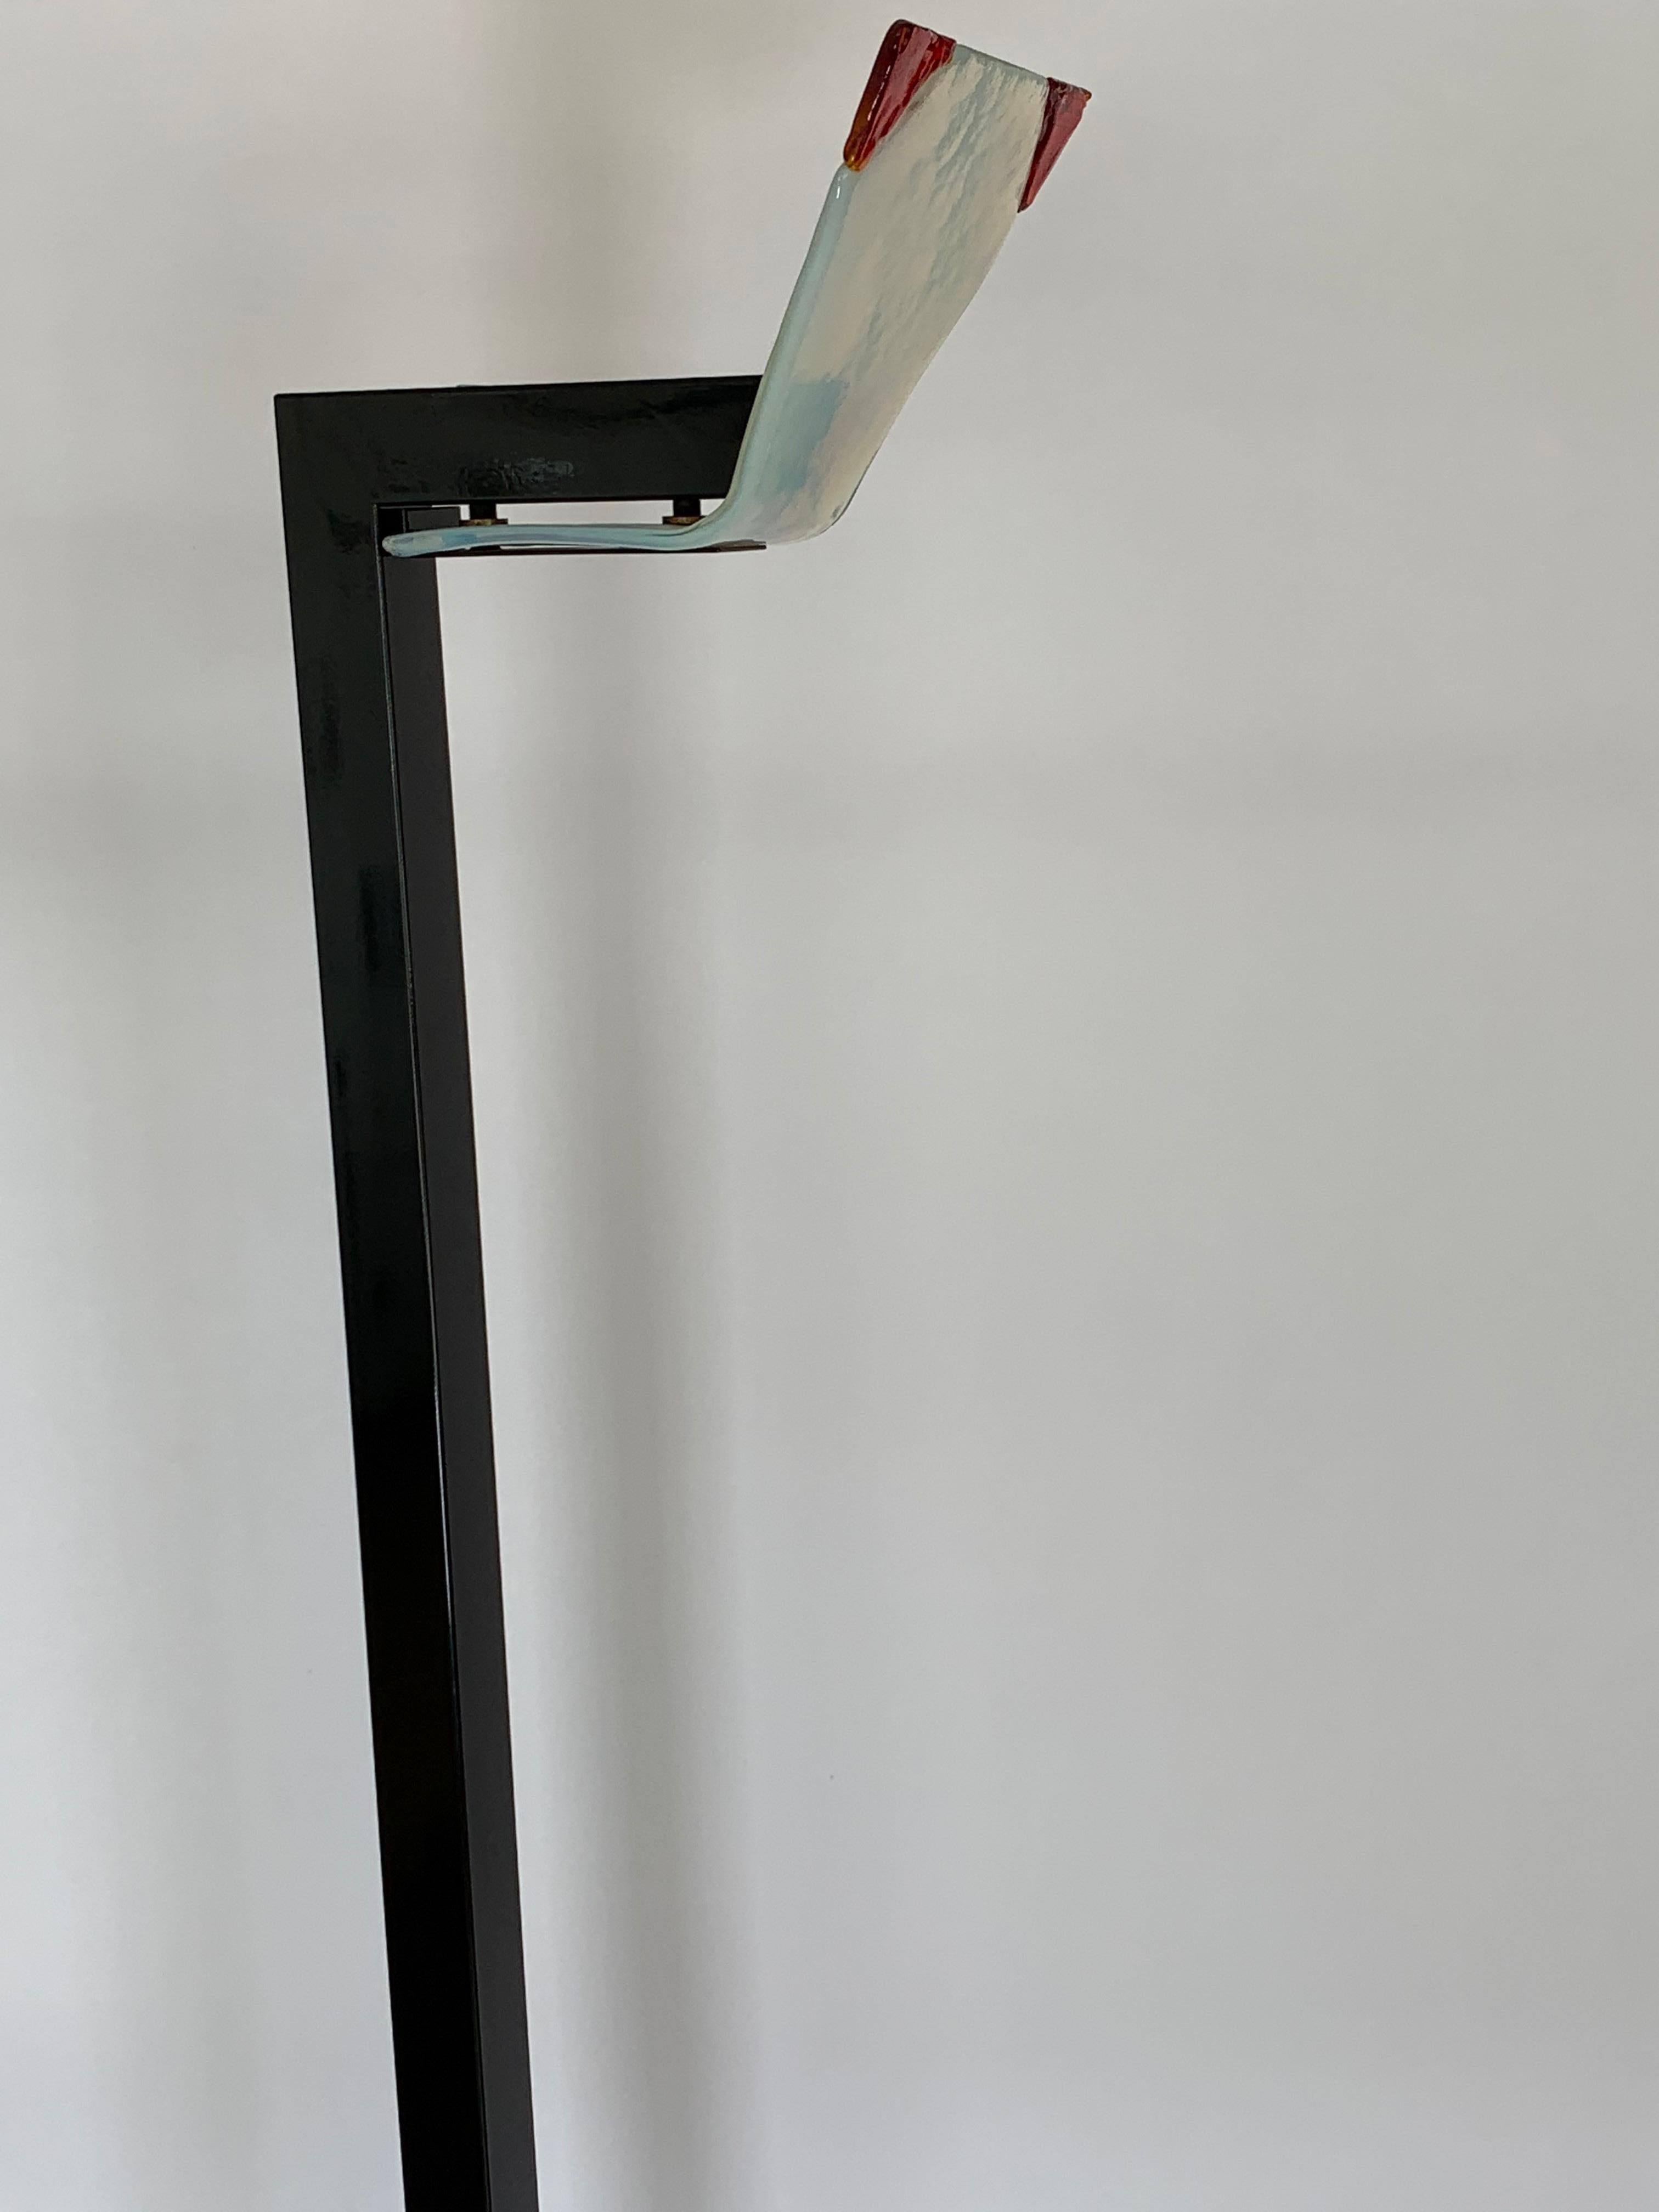 Italian Murano Glass Floor Lamp by Renato Toso for Leucos In Excellent Condition For Sale In Milan, Italy